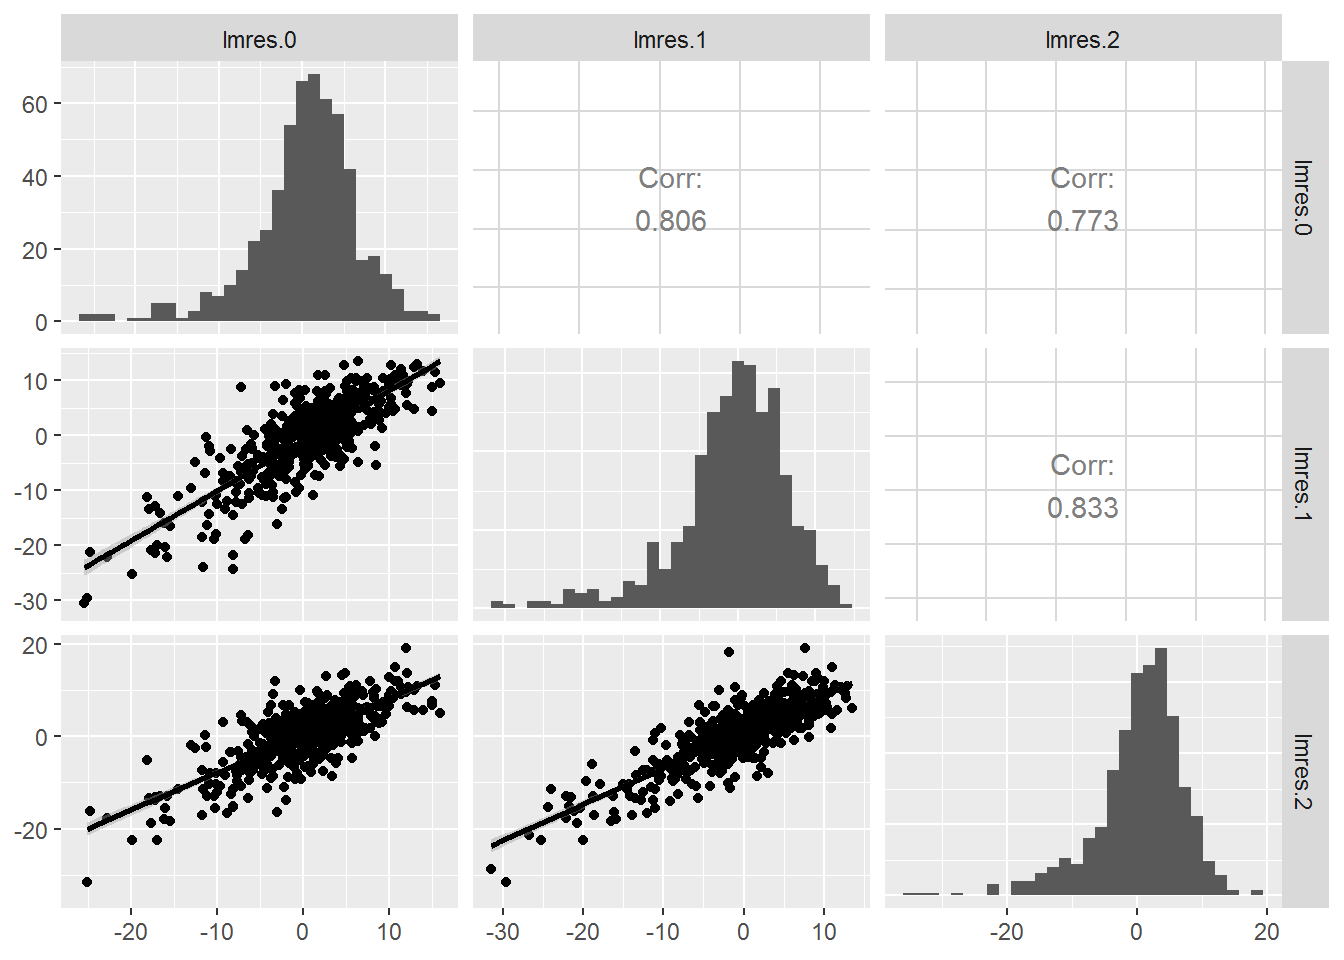 Correlation structure within school.  The upper right contains correlation coefficients between residuals at pairs of time points, the lower left contains scatterplots of the residuals at time point pairs, and the diagonal contains histograms of residuals at each of the three time points.